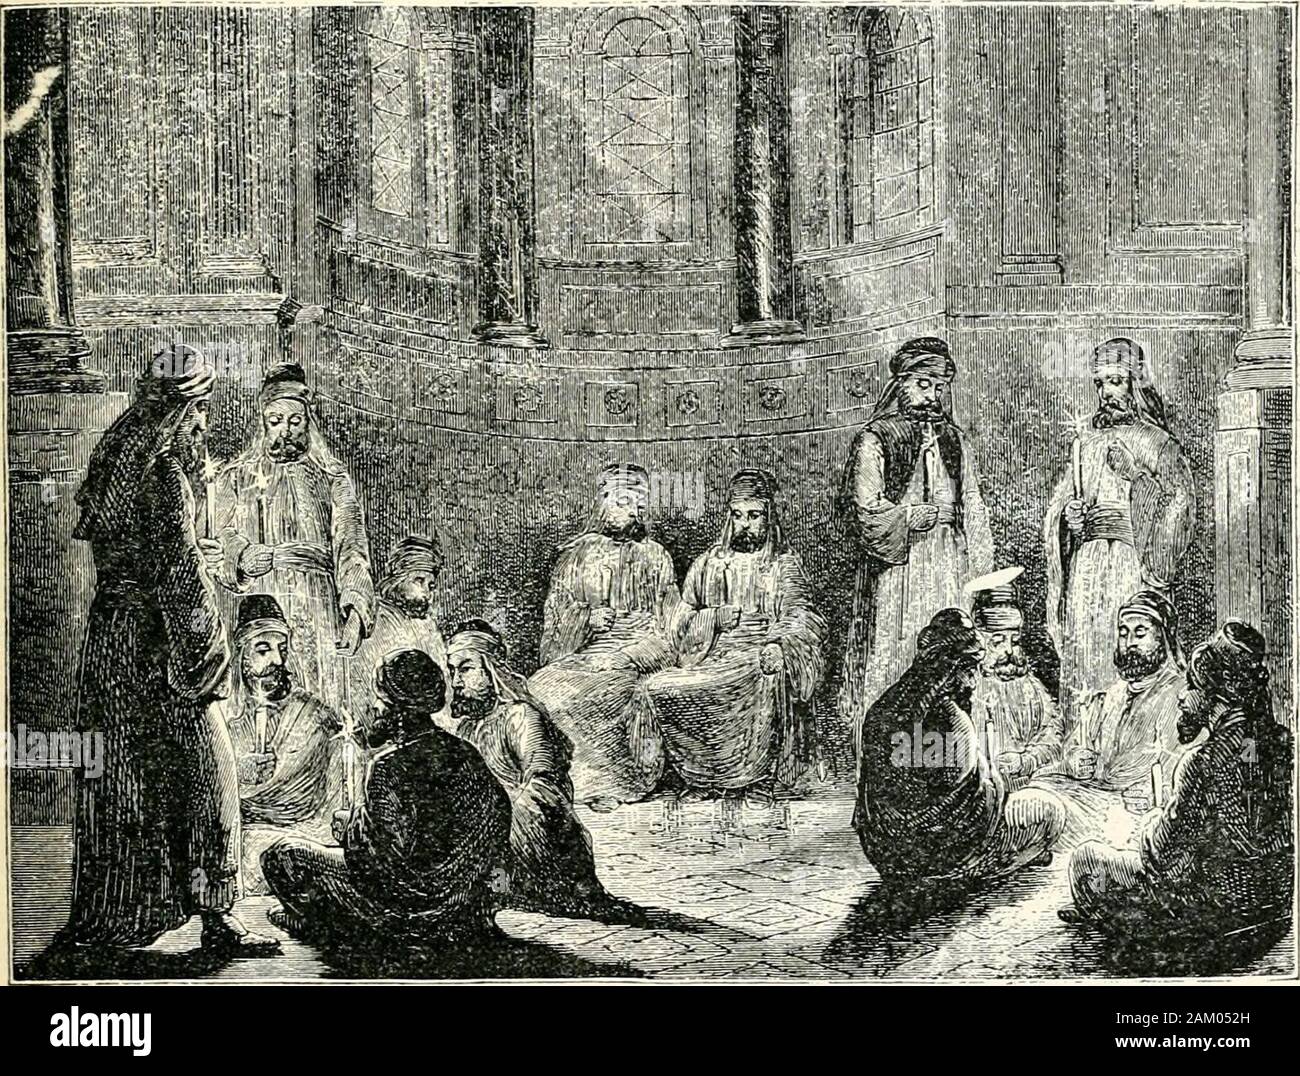 The Open court . The High Priest, in Linen Vestments.Sprinkling the blood in the holy of holies. HISTORICAL SKETCH OF THE JEWS. 275 faith, inaugurated that peculiar system of conduct toward the Jewswhich finally resulted in their total expulsion from the peninsula. The Franks were at first less merciful to the Jews than theGoths. The Merovingian line treated them with peculiar rigor.Thus in 540 King Childebert forbade the Jews to appear in thestreets of Paris during the Easter week. Clotaire I. deprived themof the power of holding office. King Dagobert (629) compelledthem either to receive bap Stock Photo